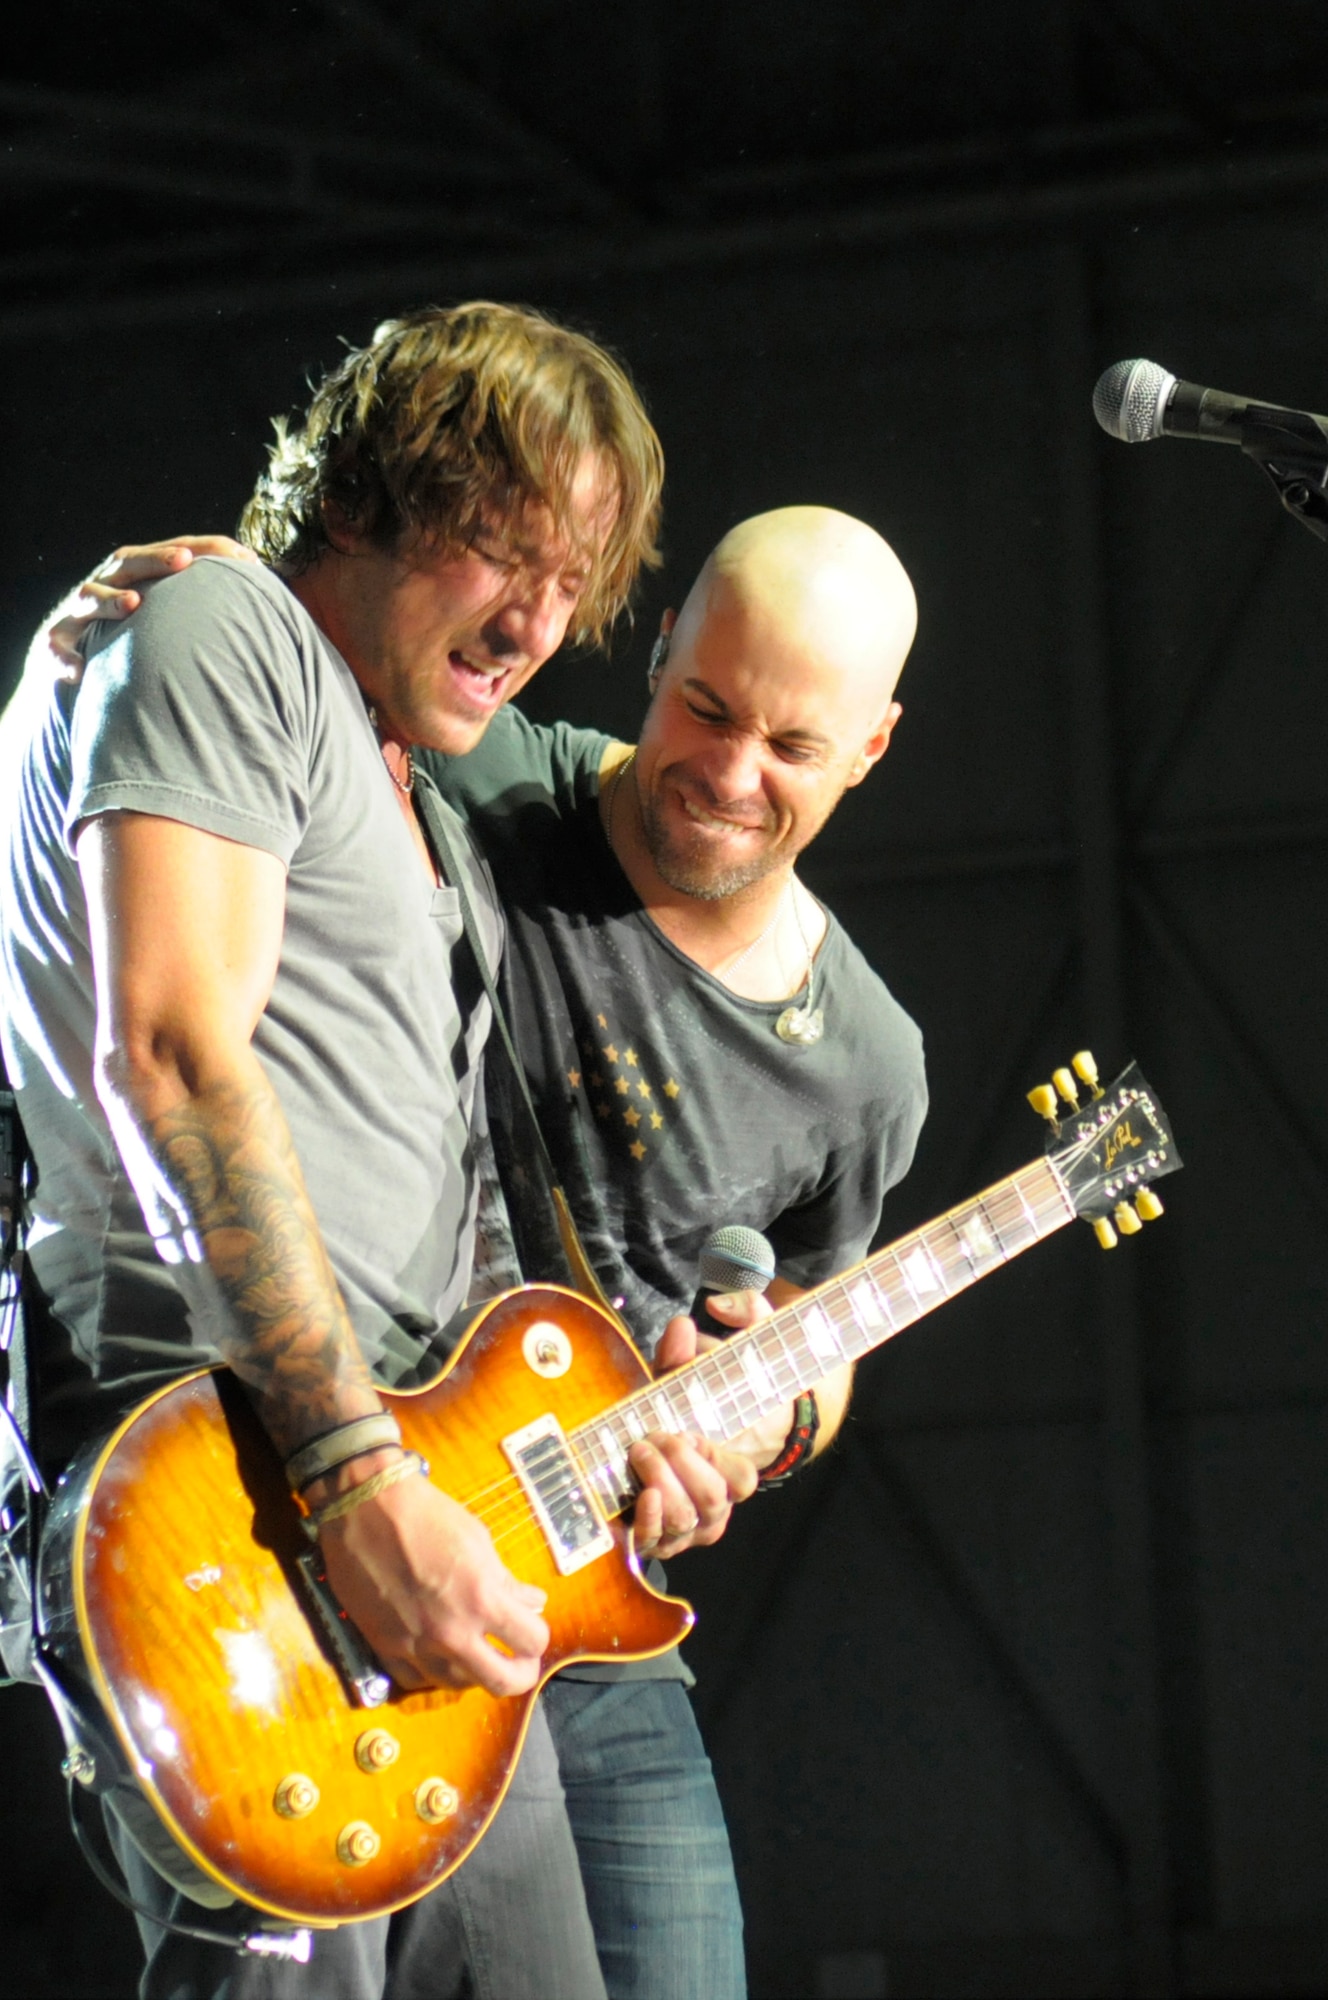 Chris Daughtry jams with his guitarist, Josh Steely, during a concert at Hangar 1 in Ramstein Air Base, Germany, Dec. 10, 2011. The rock band Daughtry, comedian Gabriel "Fluffy" Iglesias and the Band of the U.S. Air Force Reserve performed during a concert for more than 4,000 service members. The performers finished out their 13-day tour at Ramstein. Their six concerts took them through Southwest Asia and Europe to bring entertainment to American troops and their families as part of the Operation Seasons Greetings - Tour for the Troops 2011. (U.S. Air Force photo by Staff Sgt. Travis Edwards)